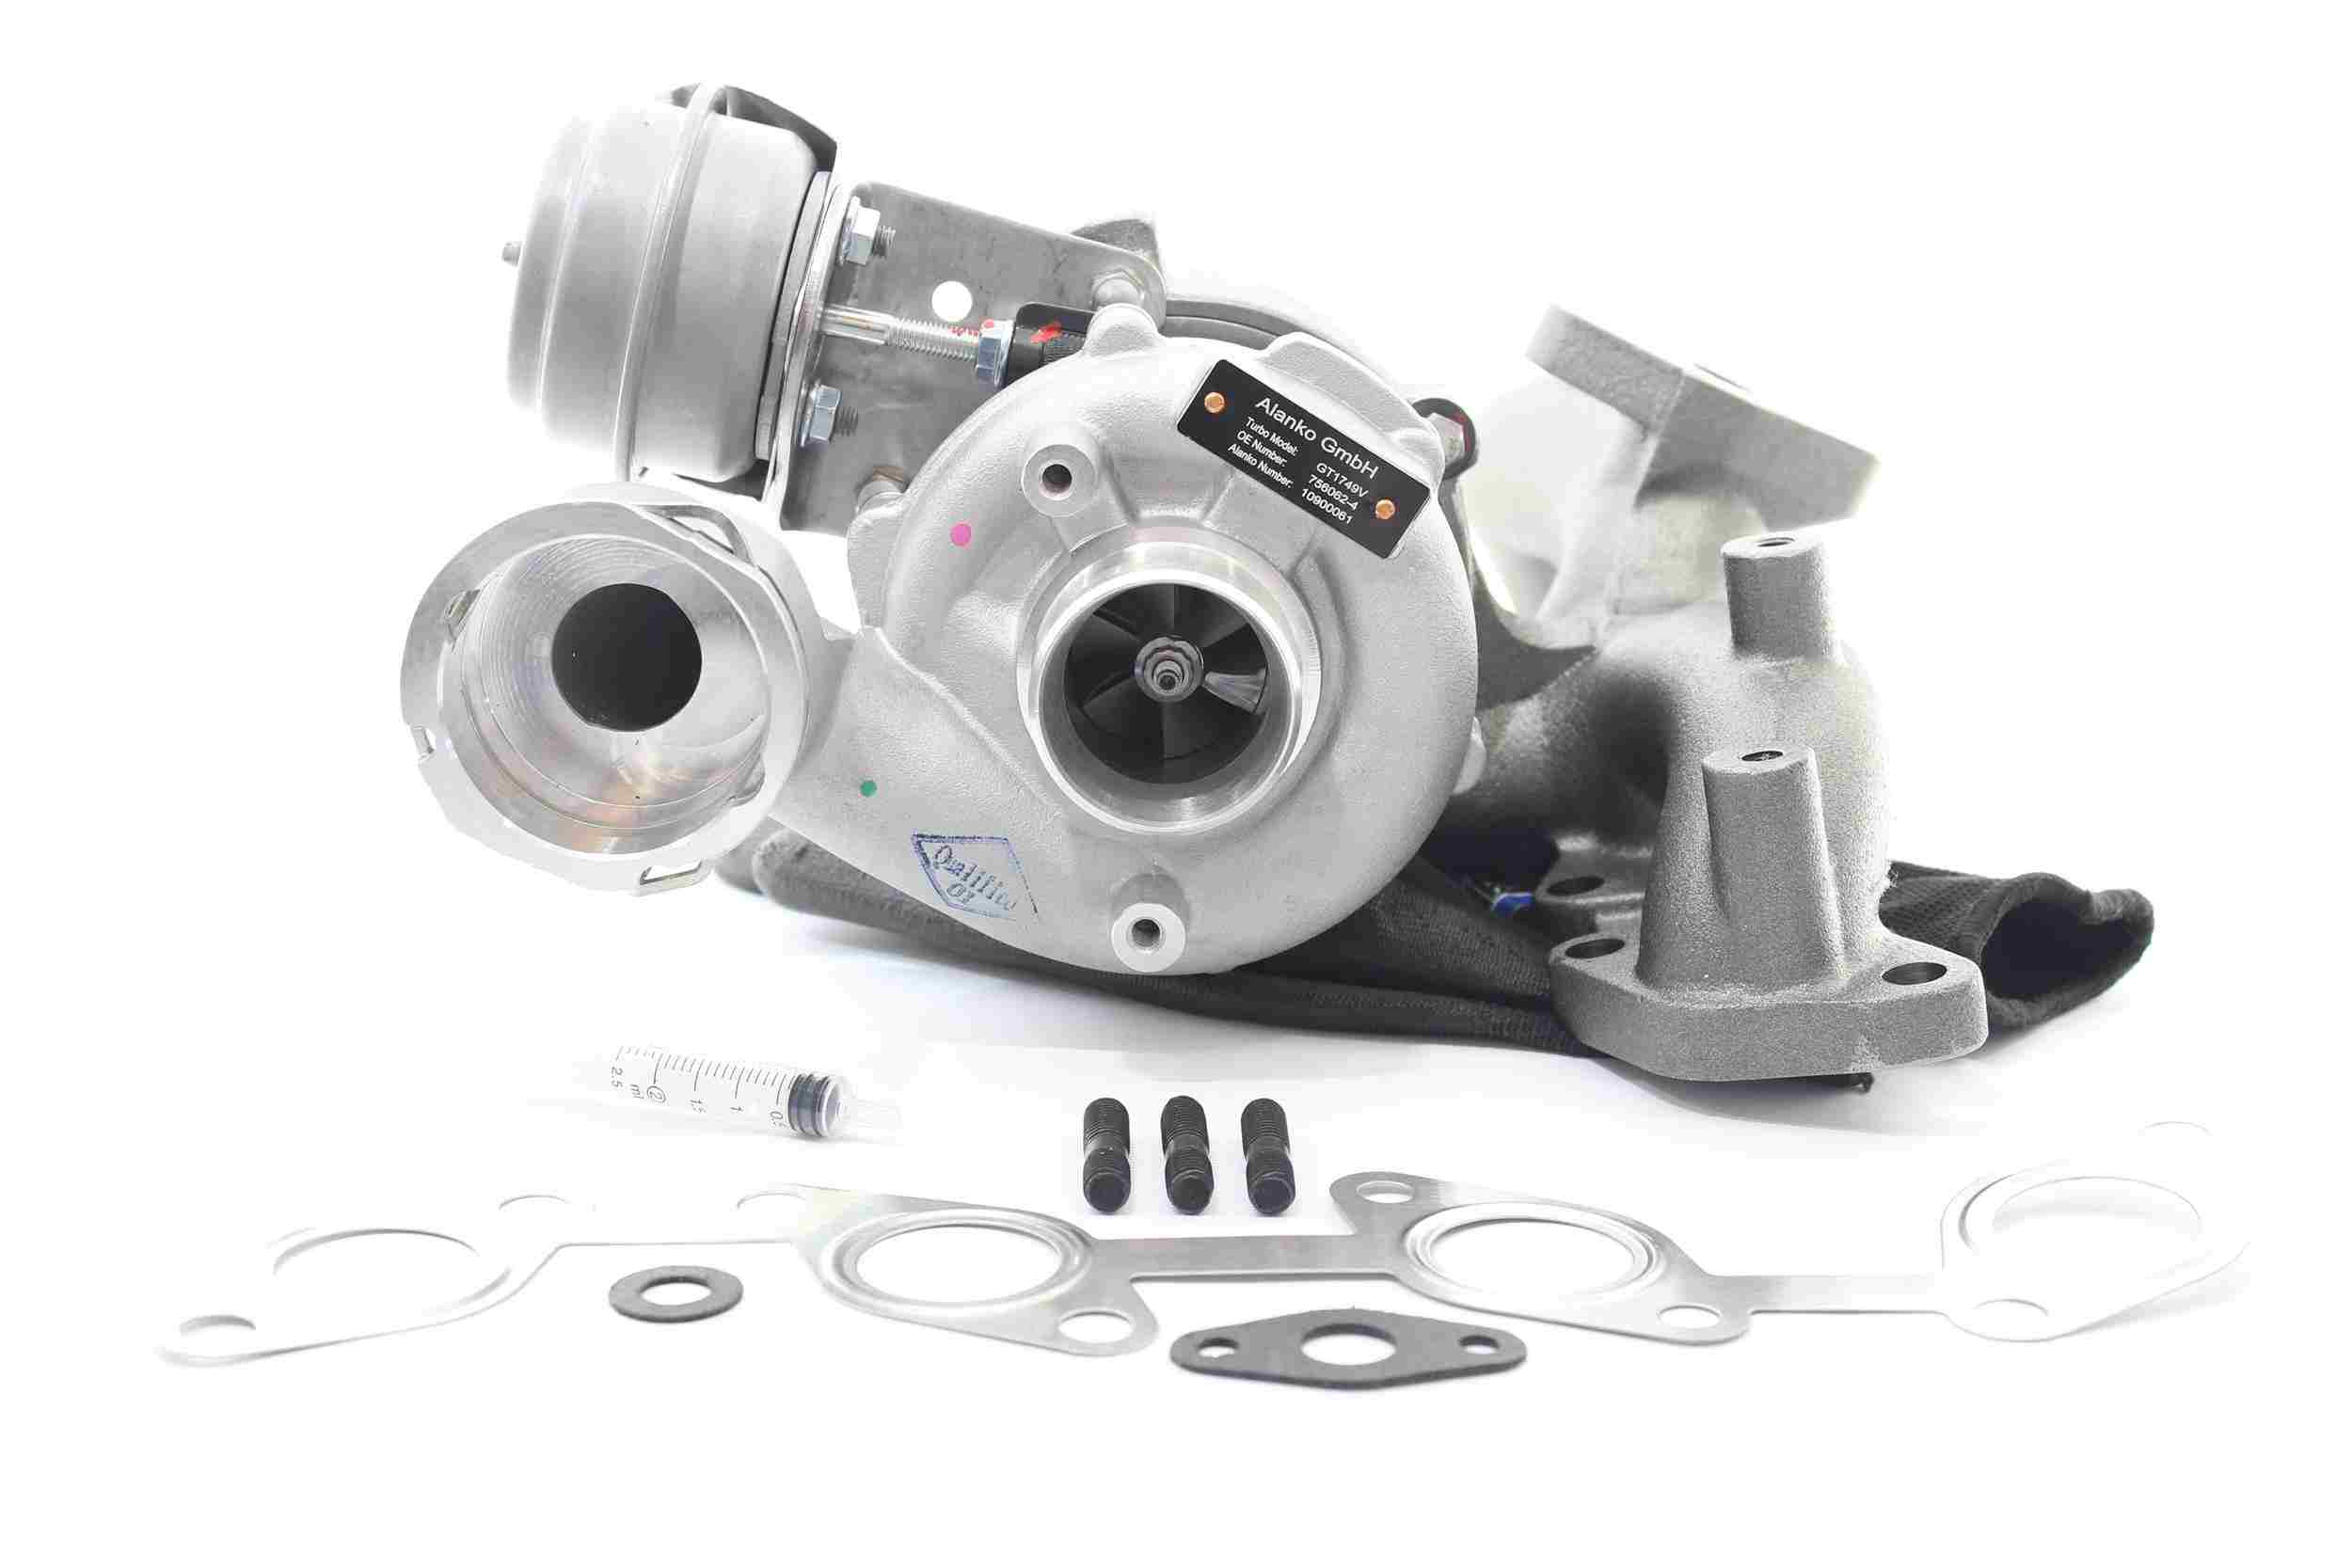 ALANKO 10900061 Turbocharger Exhaust Turbocharger, Euro 4 (D4), VNT/VTG, Incl. Gasket Set, with attachment material